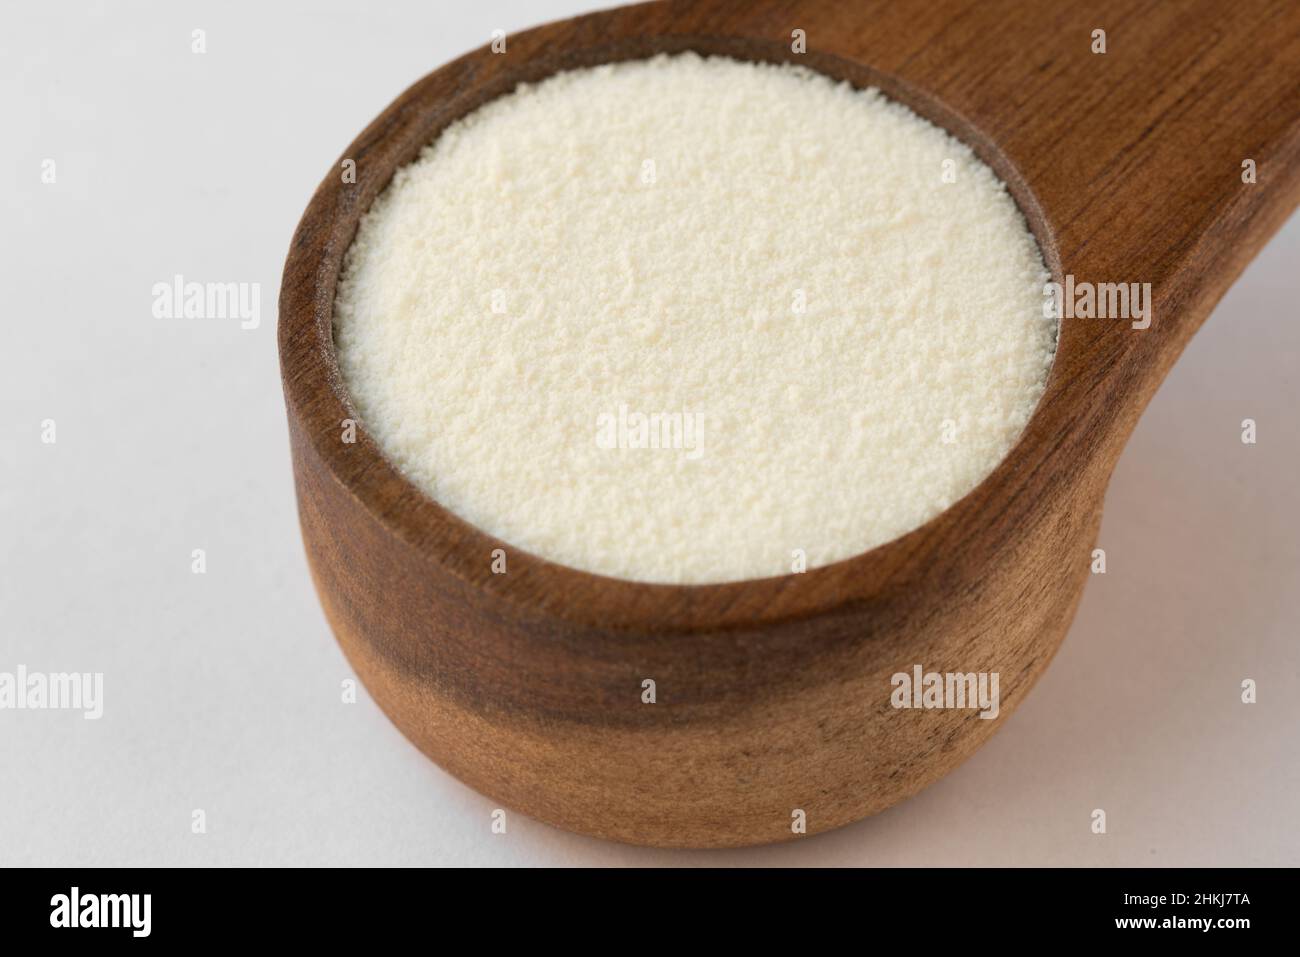 Collagen Peptides Powder in a Scoop Stock Photo